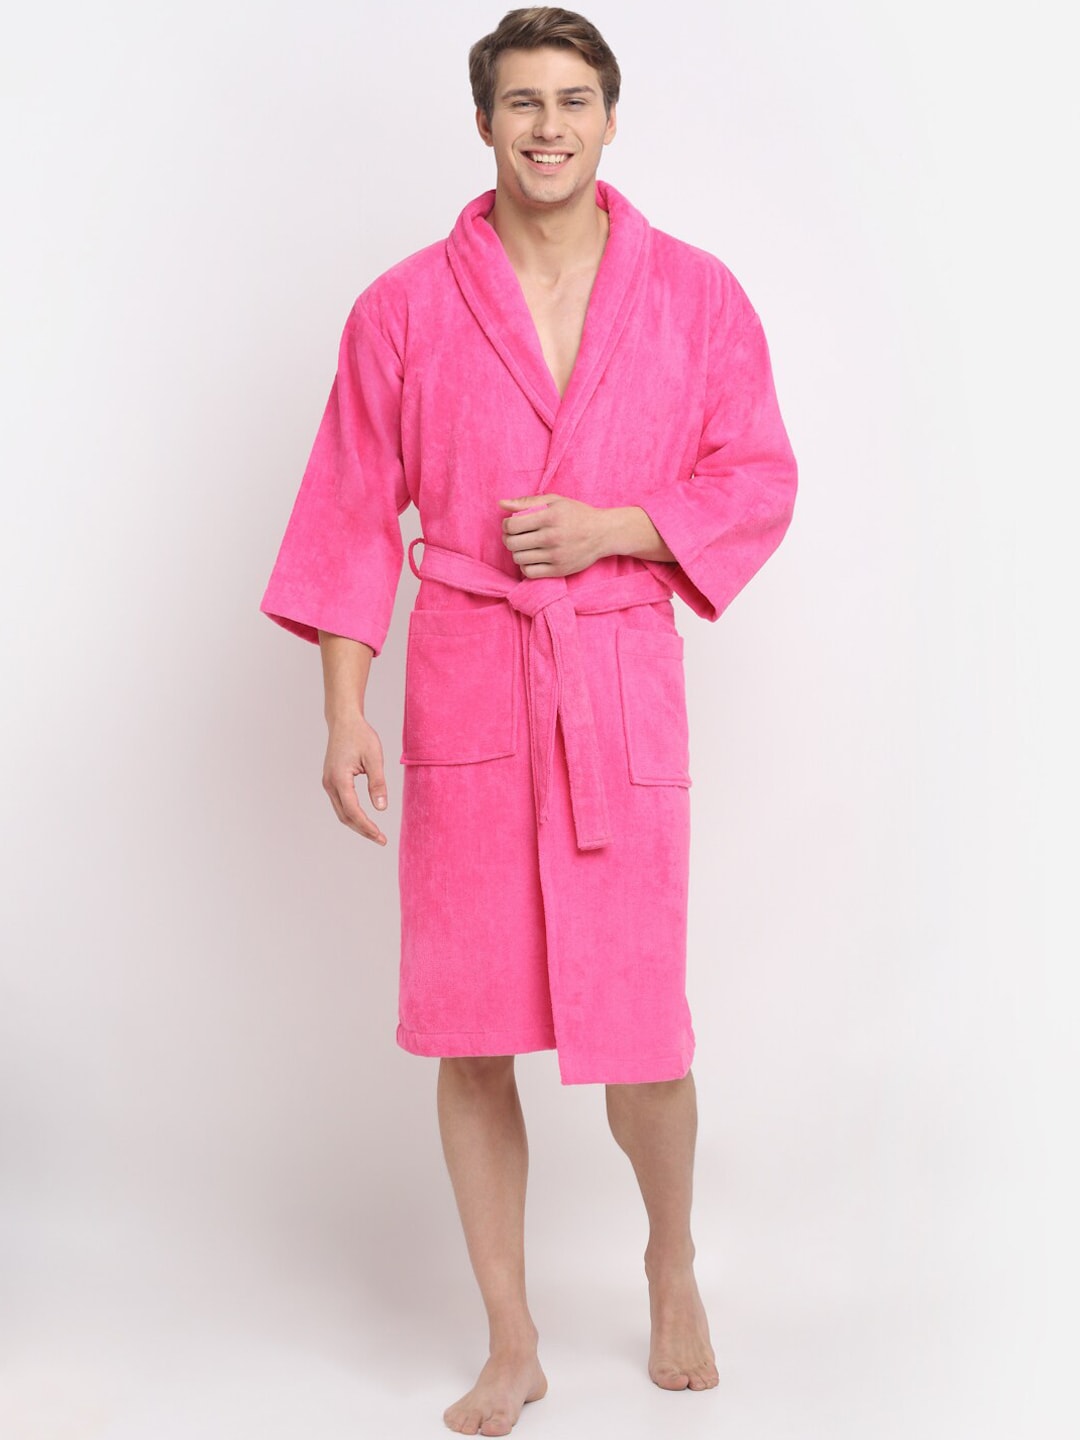 Creeva Unisex Pink Solid Bath Robe With Pockets Price in India